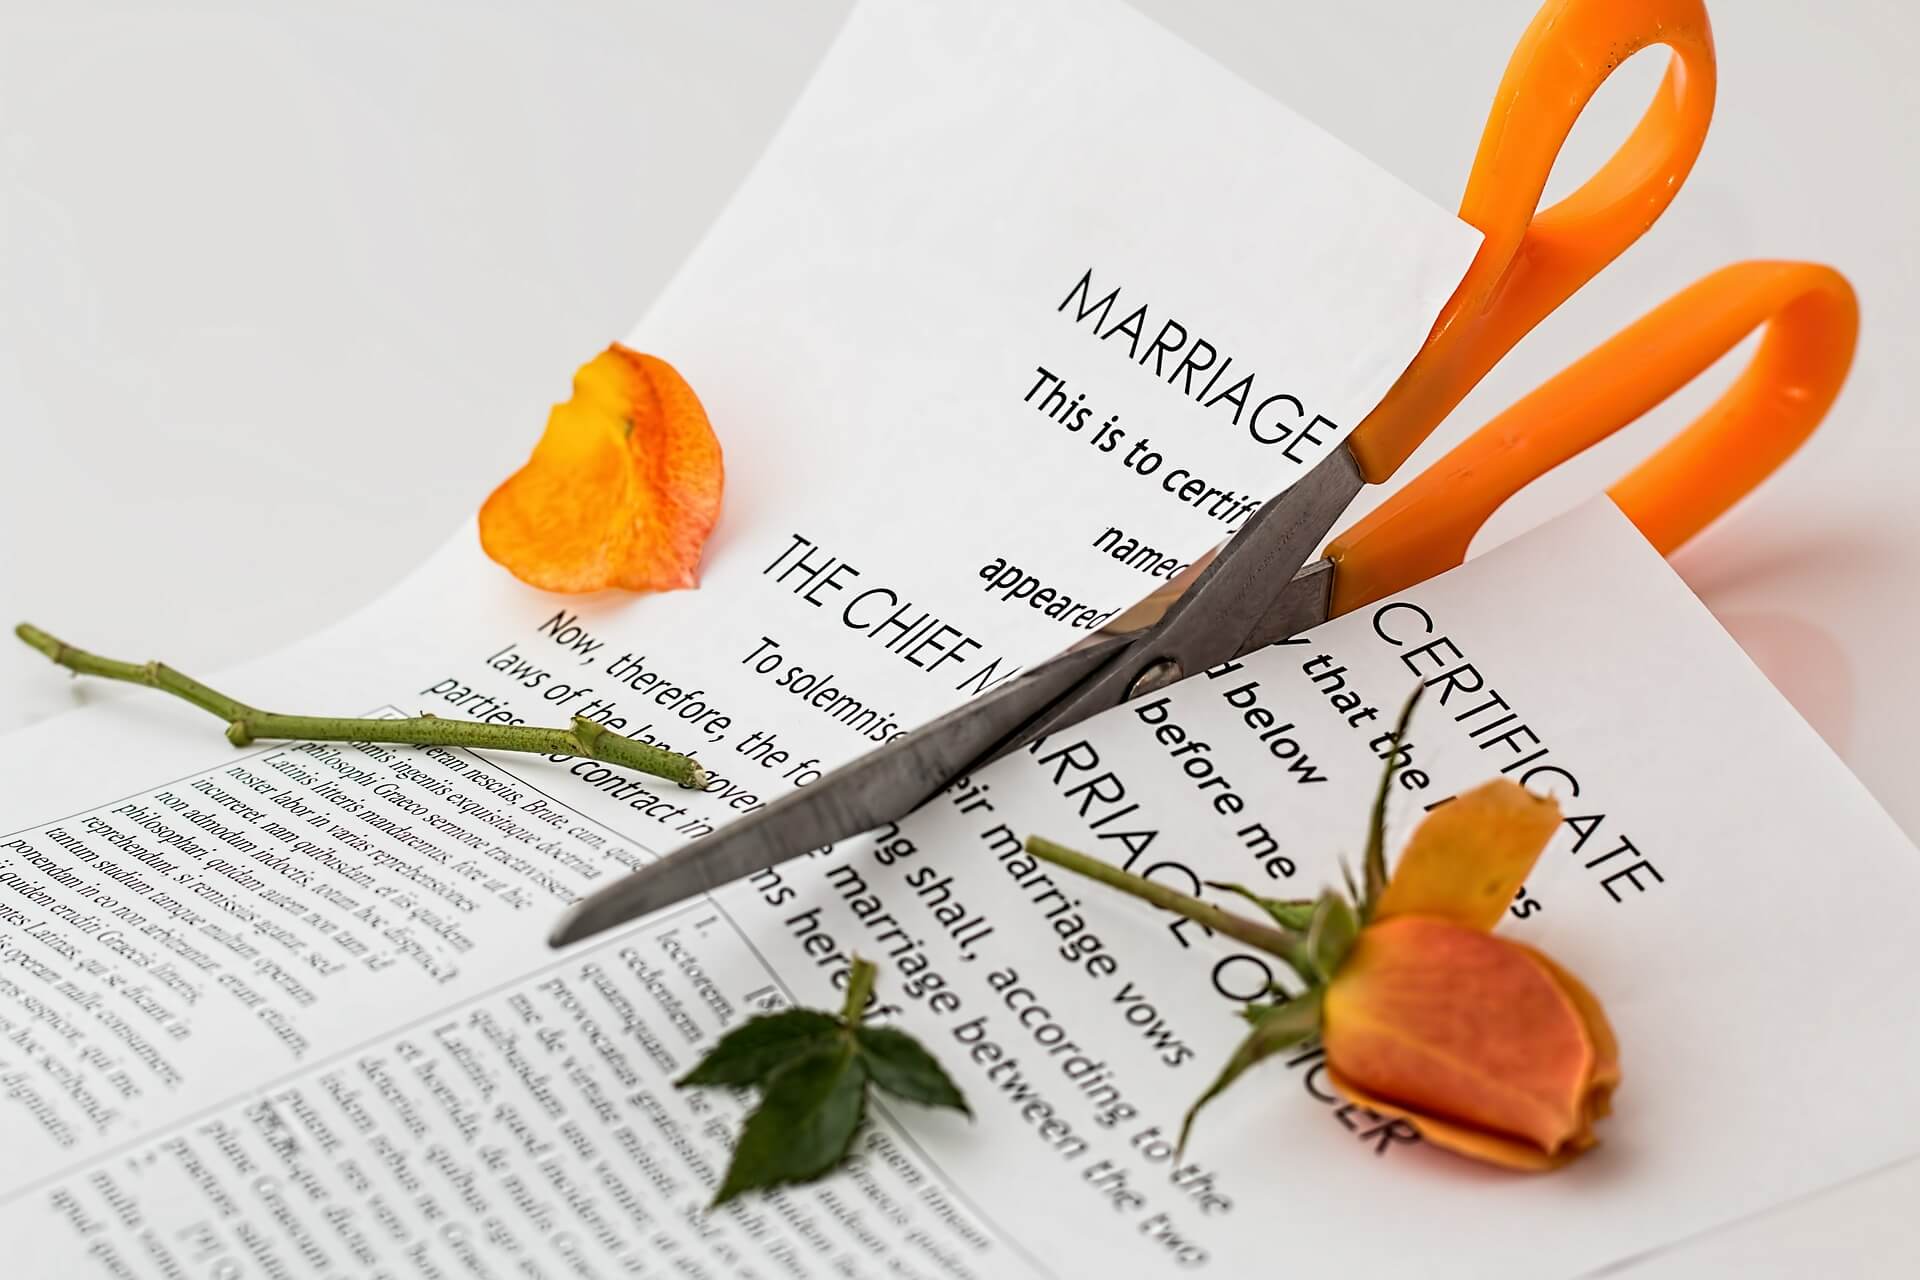 Alimony in Georgia - What does the Law say and who can get it after a marriage fails?